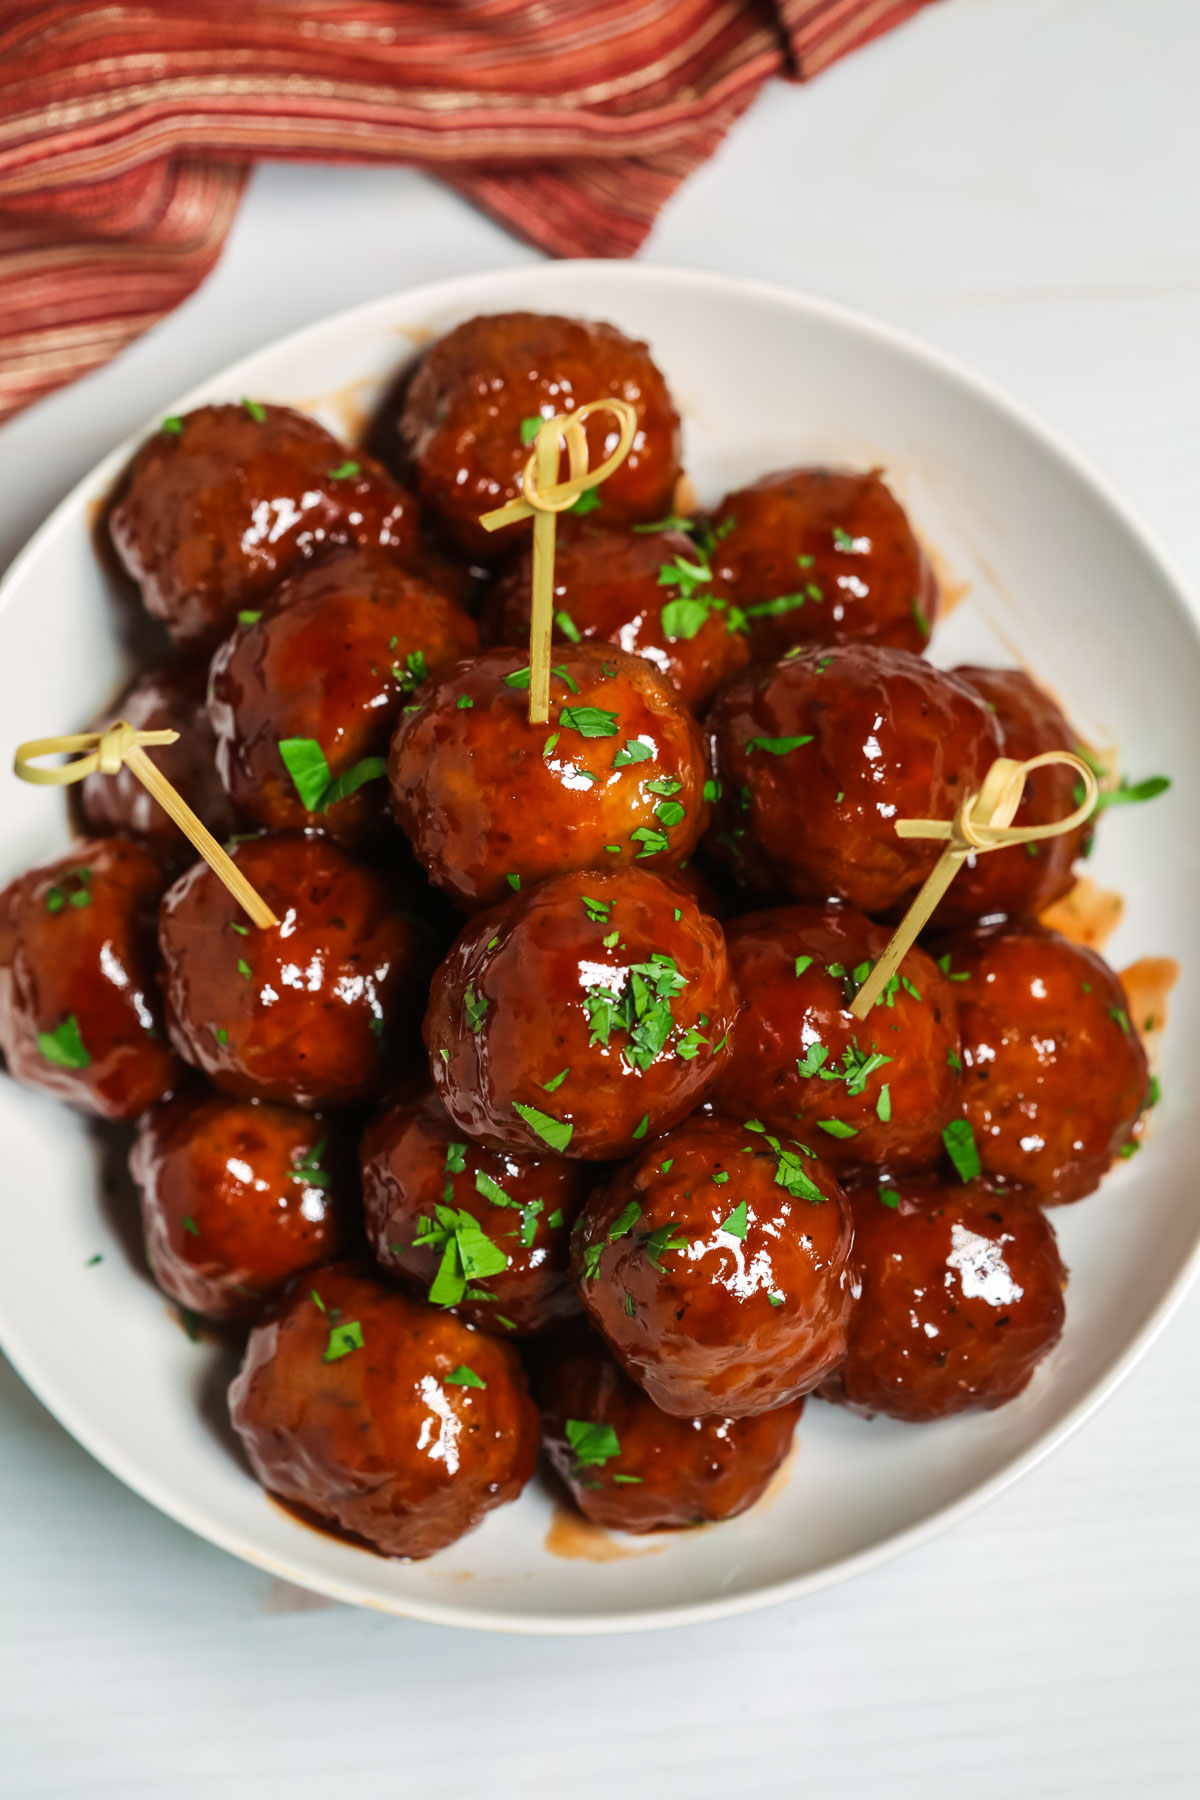 Barbecue meatballs with grape jellly on a plate, served with toothpicks.